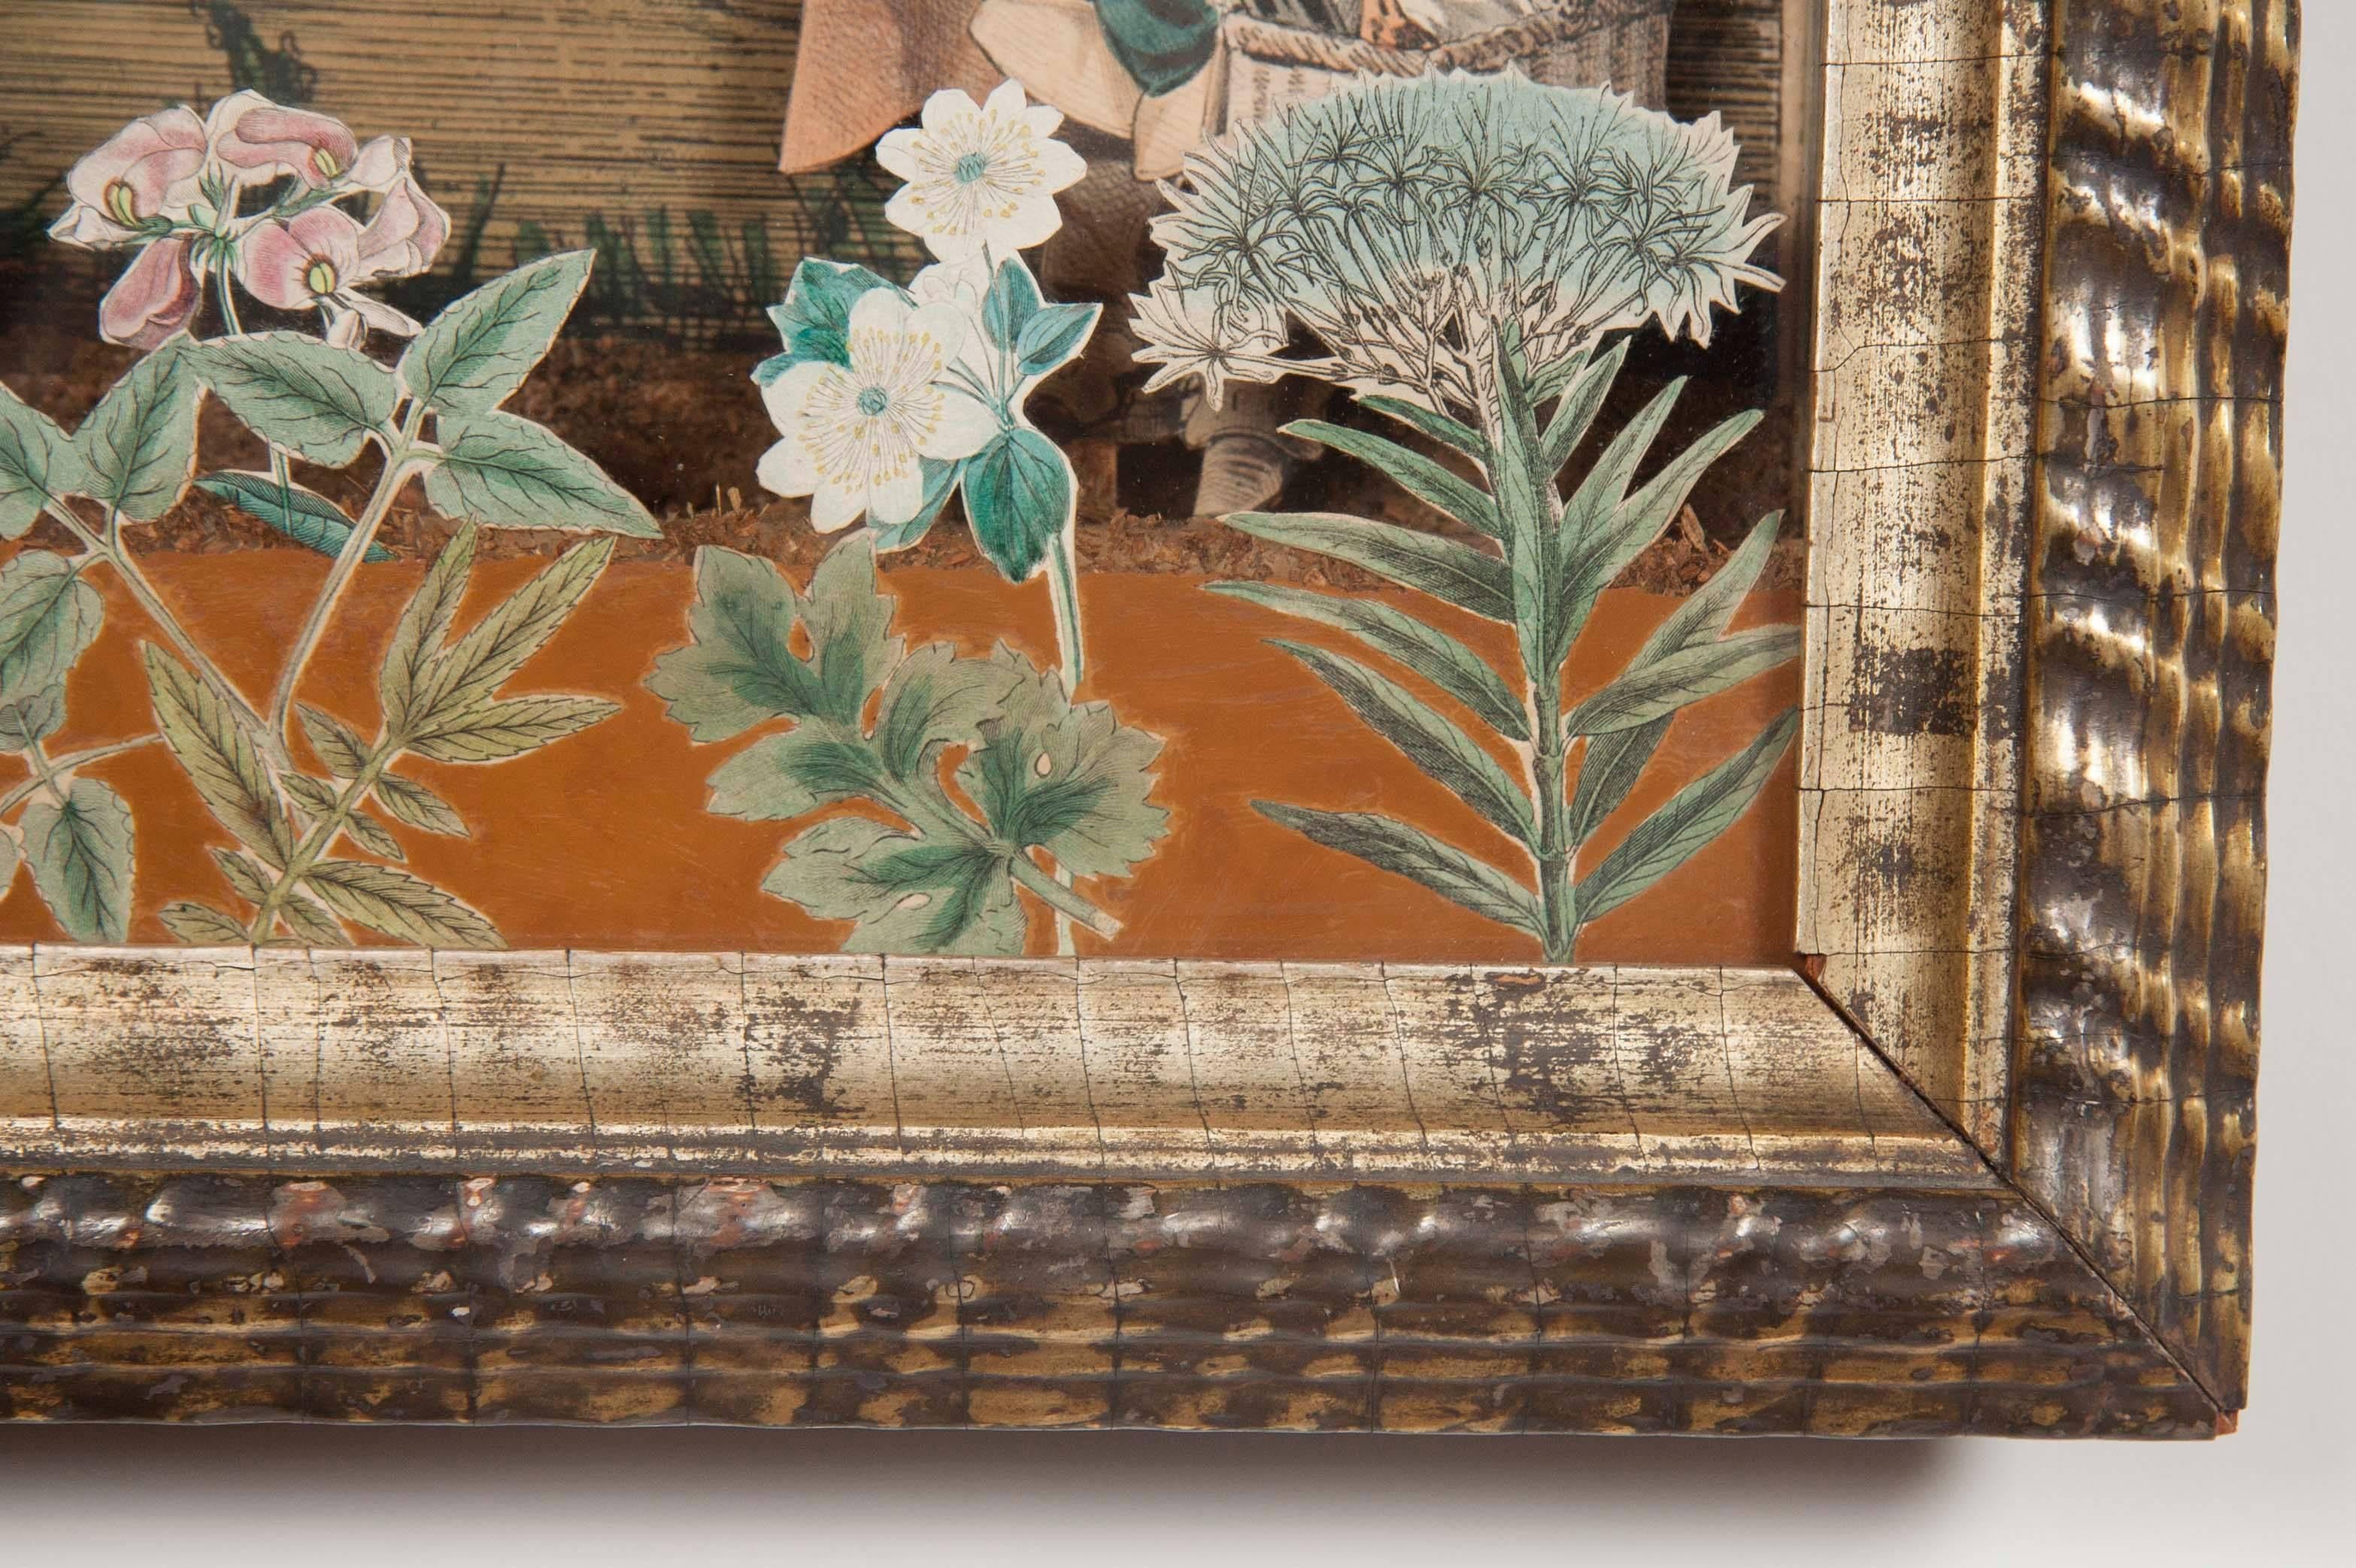 Charming 18th century French diorama with hand colored copper plate engraving. In original shadowbox with gold leaf ripple frame. Though titled on the reverse 